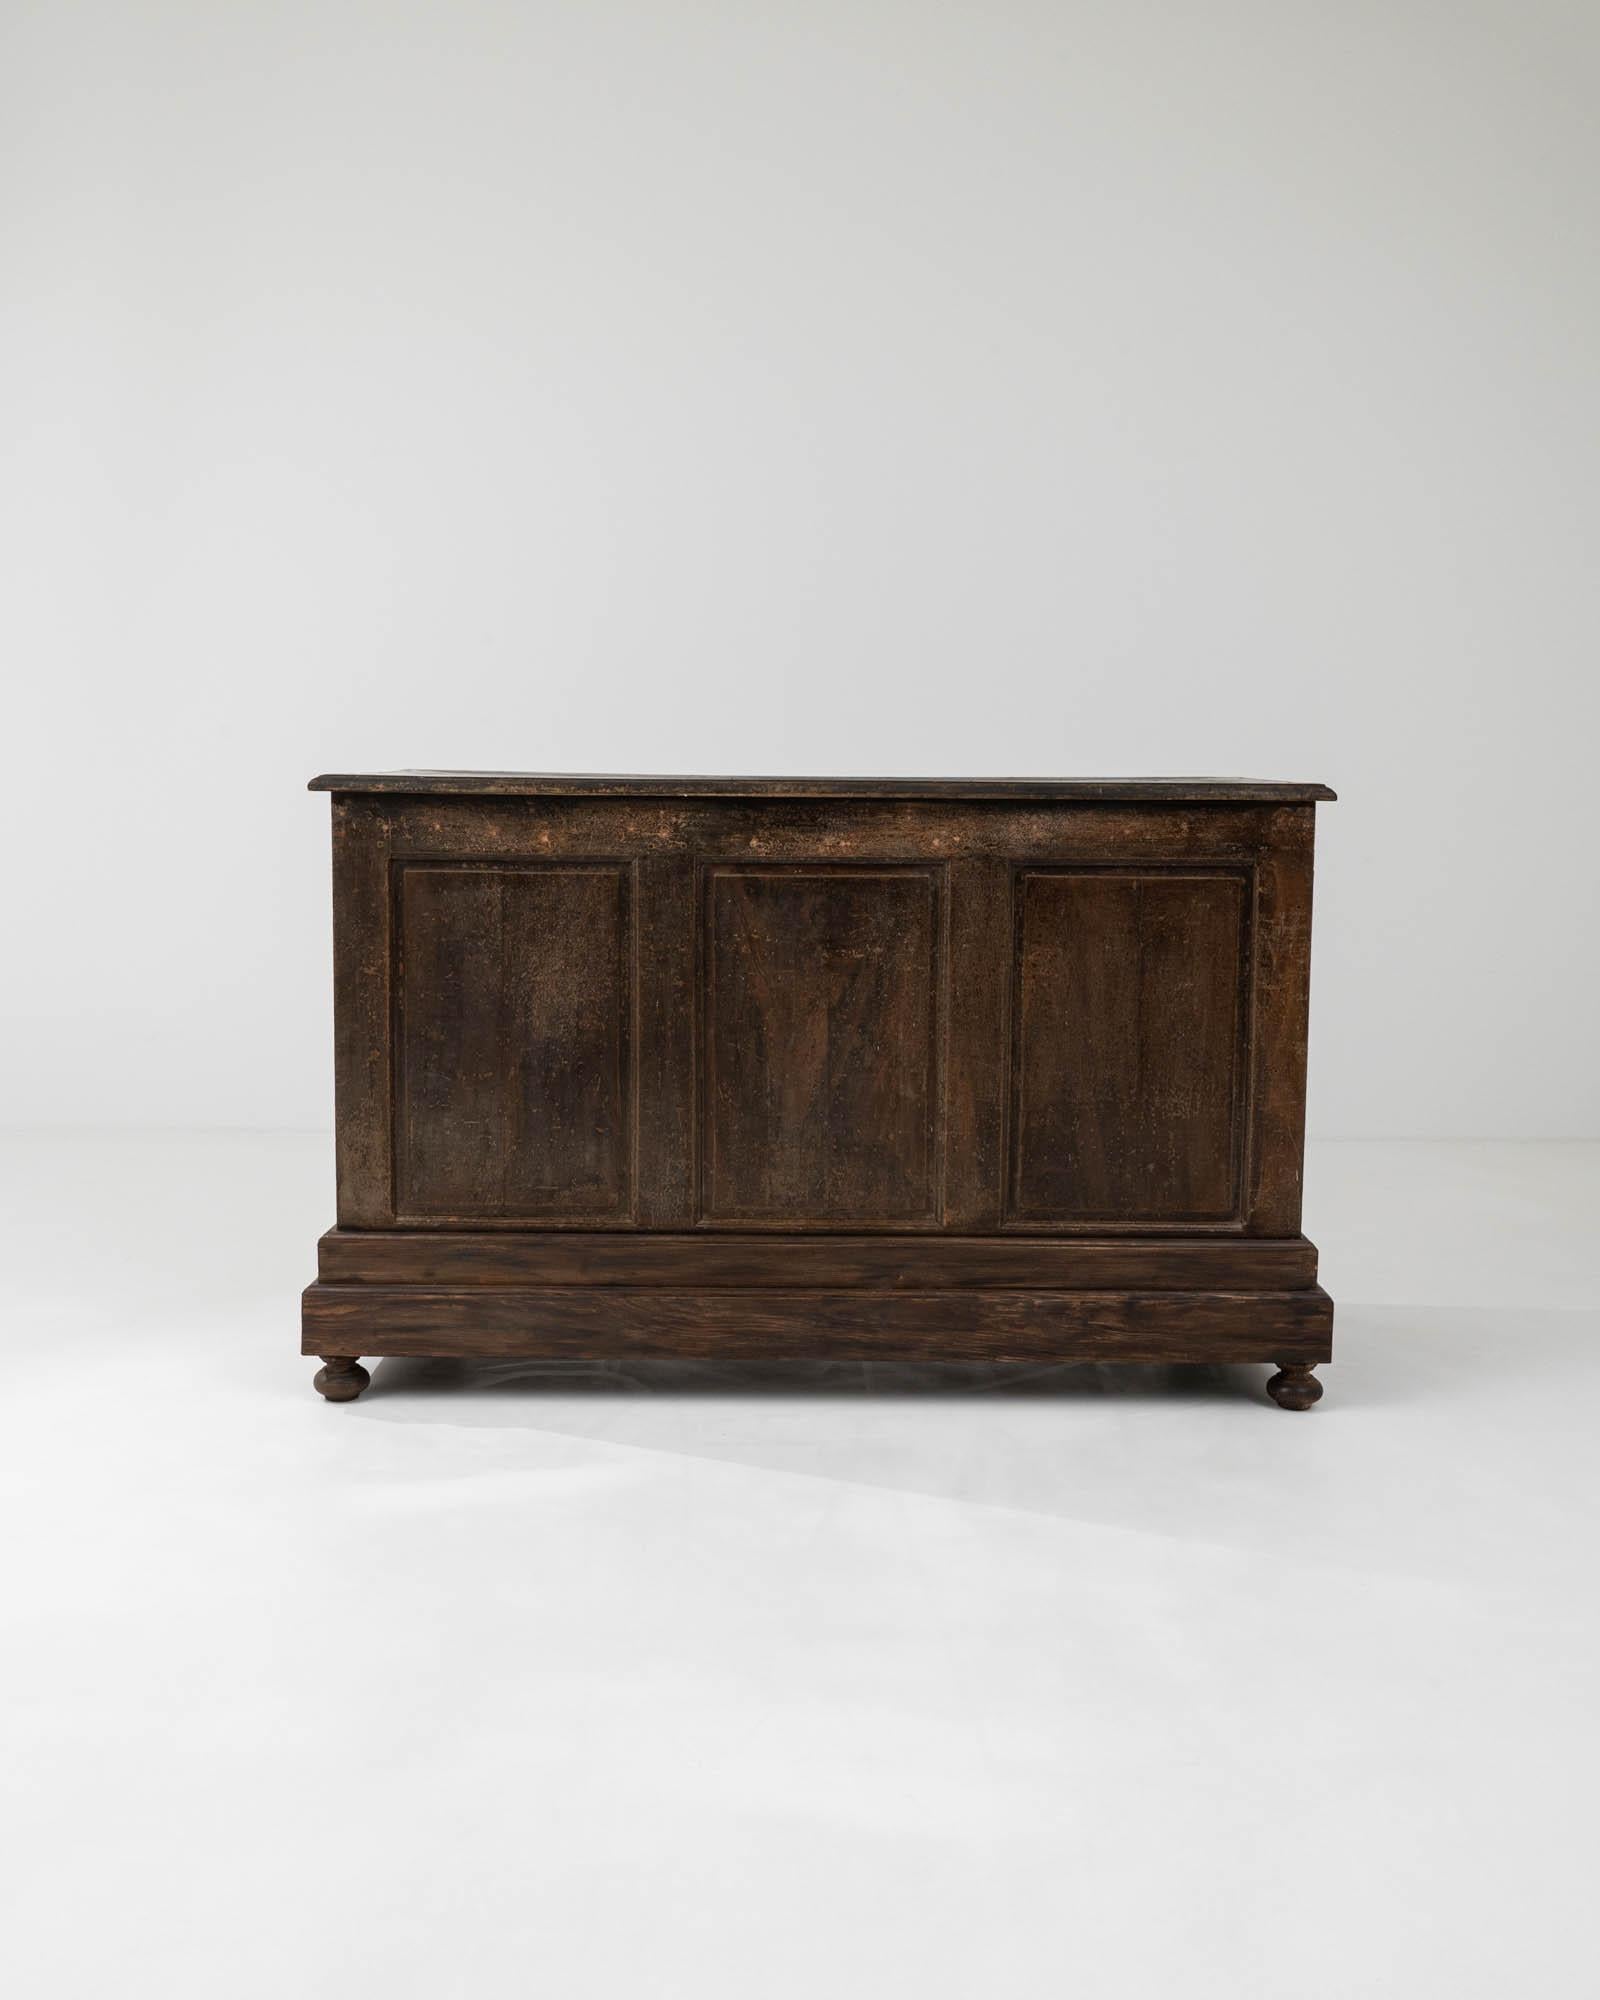 Bearing witness to years of customer interactions, this oak shop counter was crafted in 19th-century France. Its design exudes elegance with intricate profiled panels gracing the front and sides of the bar, along with molded step carvings on the